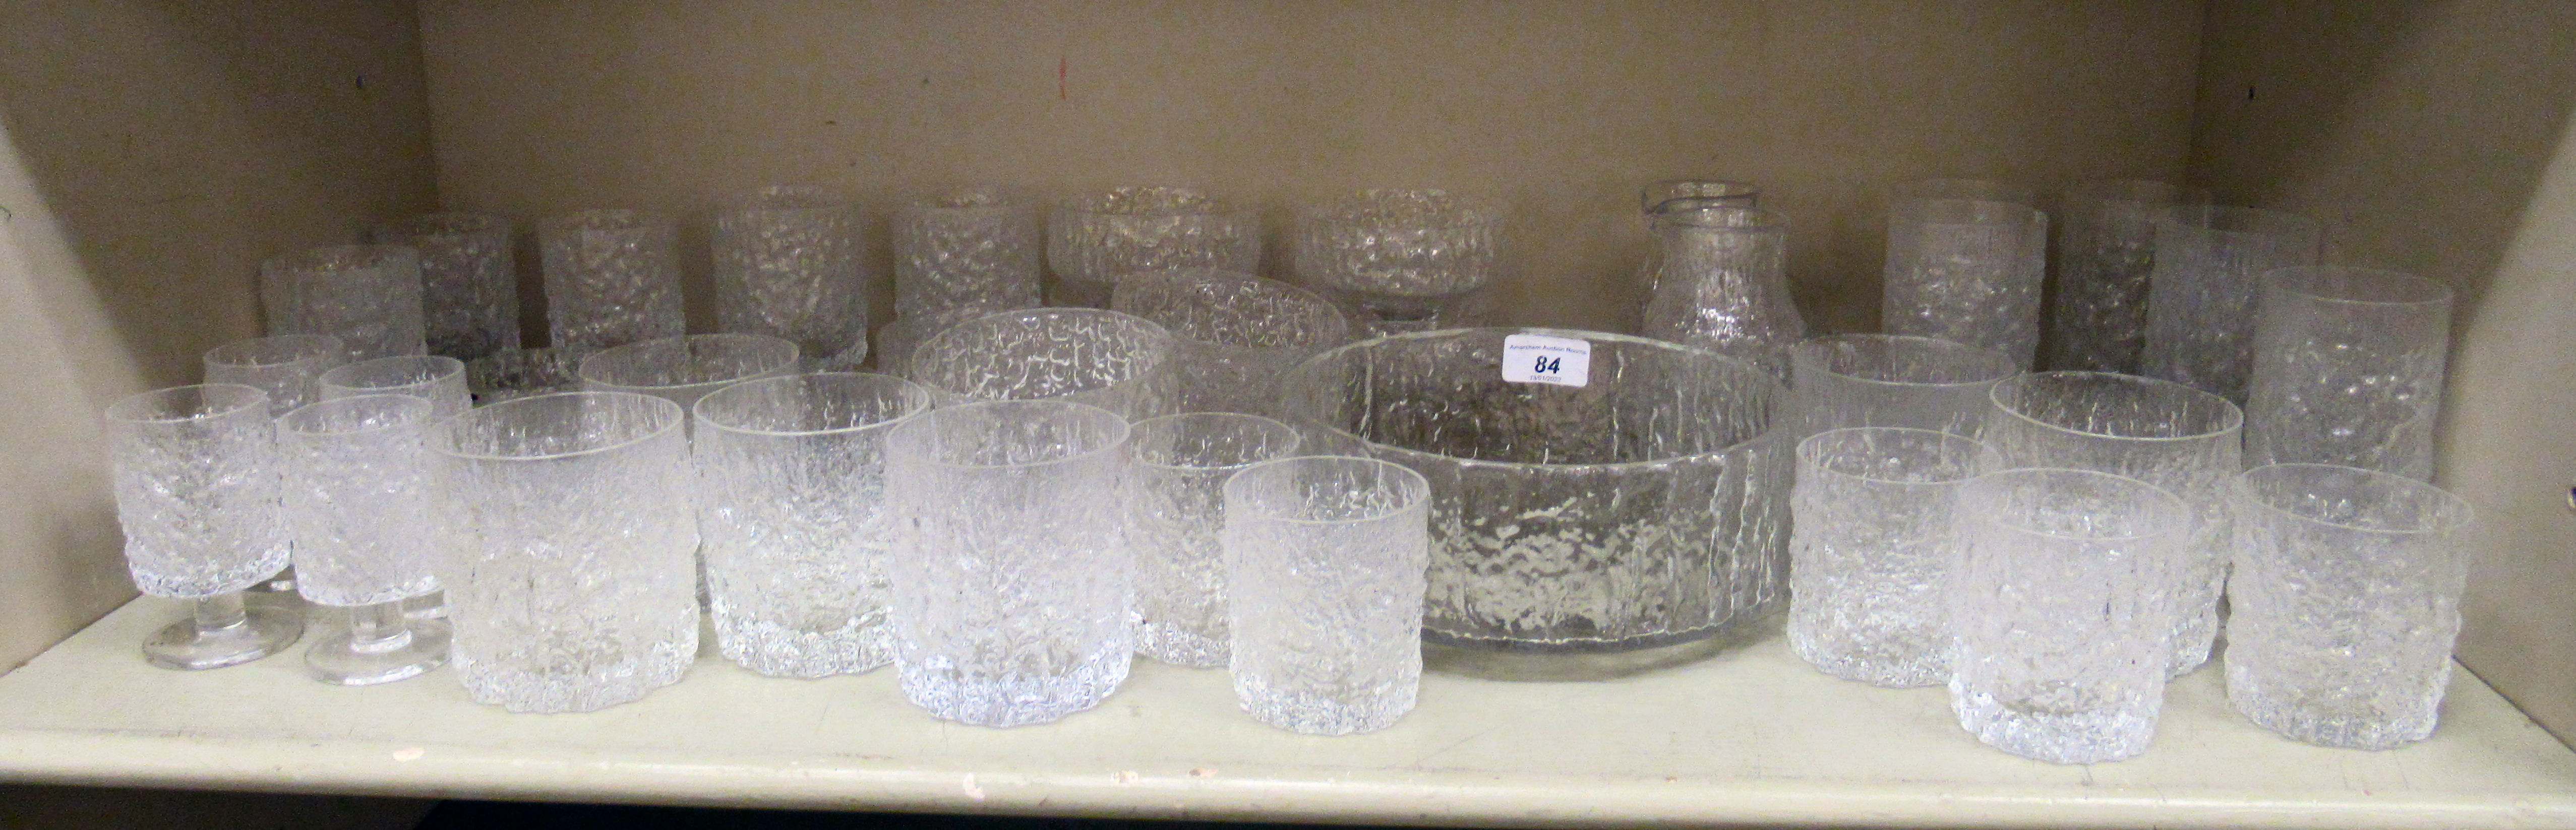 Possibly Whitefriars, bark effect glassware: to include two sizes of tumblers